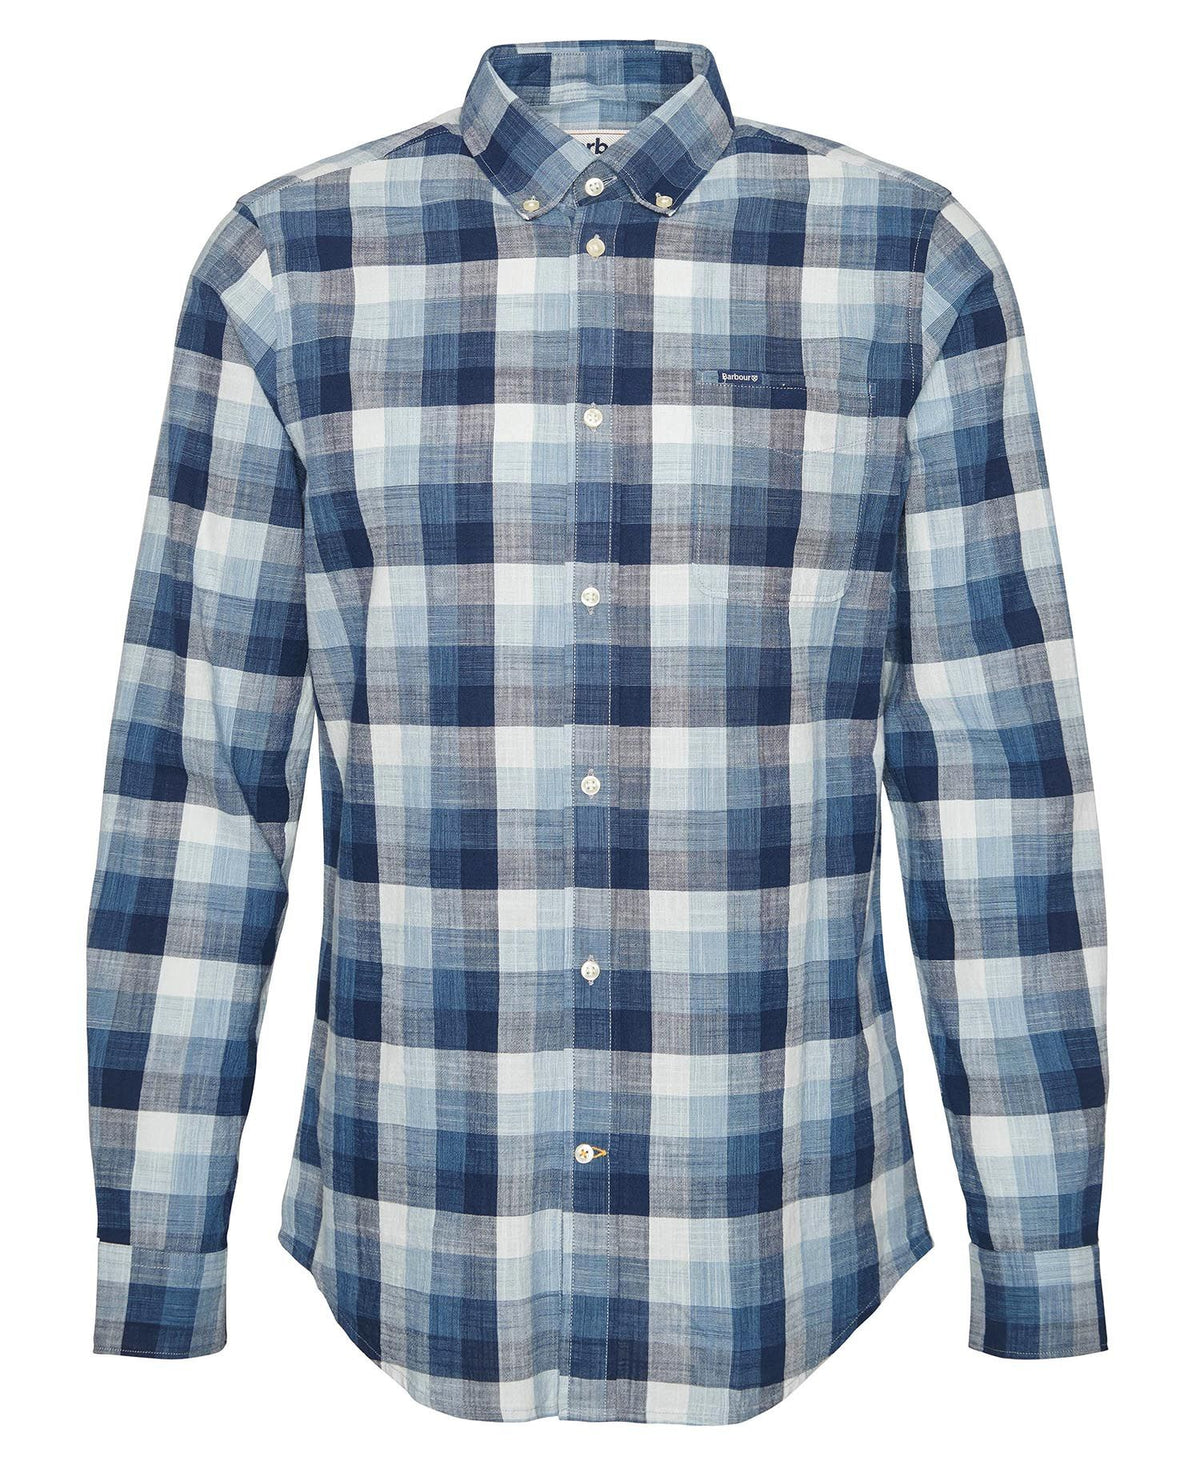 Barbour Hillroad Tailored Fit Shirt